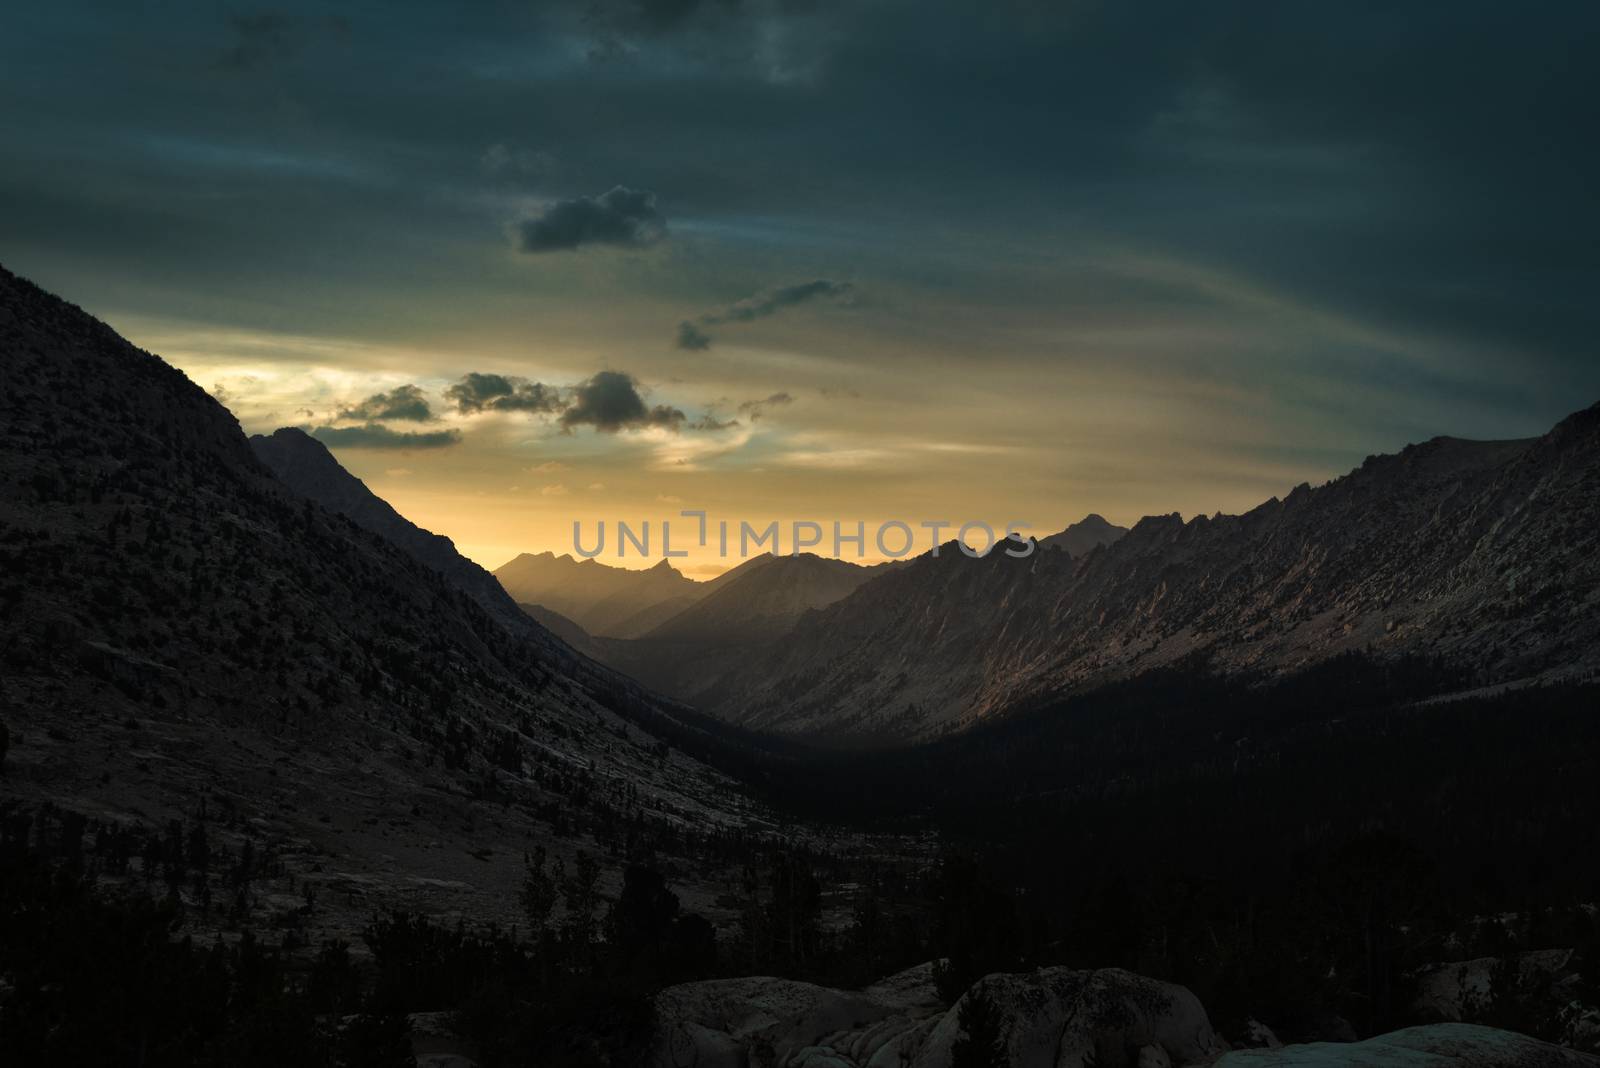 Sunset in Kings Canyon National Park by patricklienin